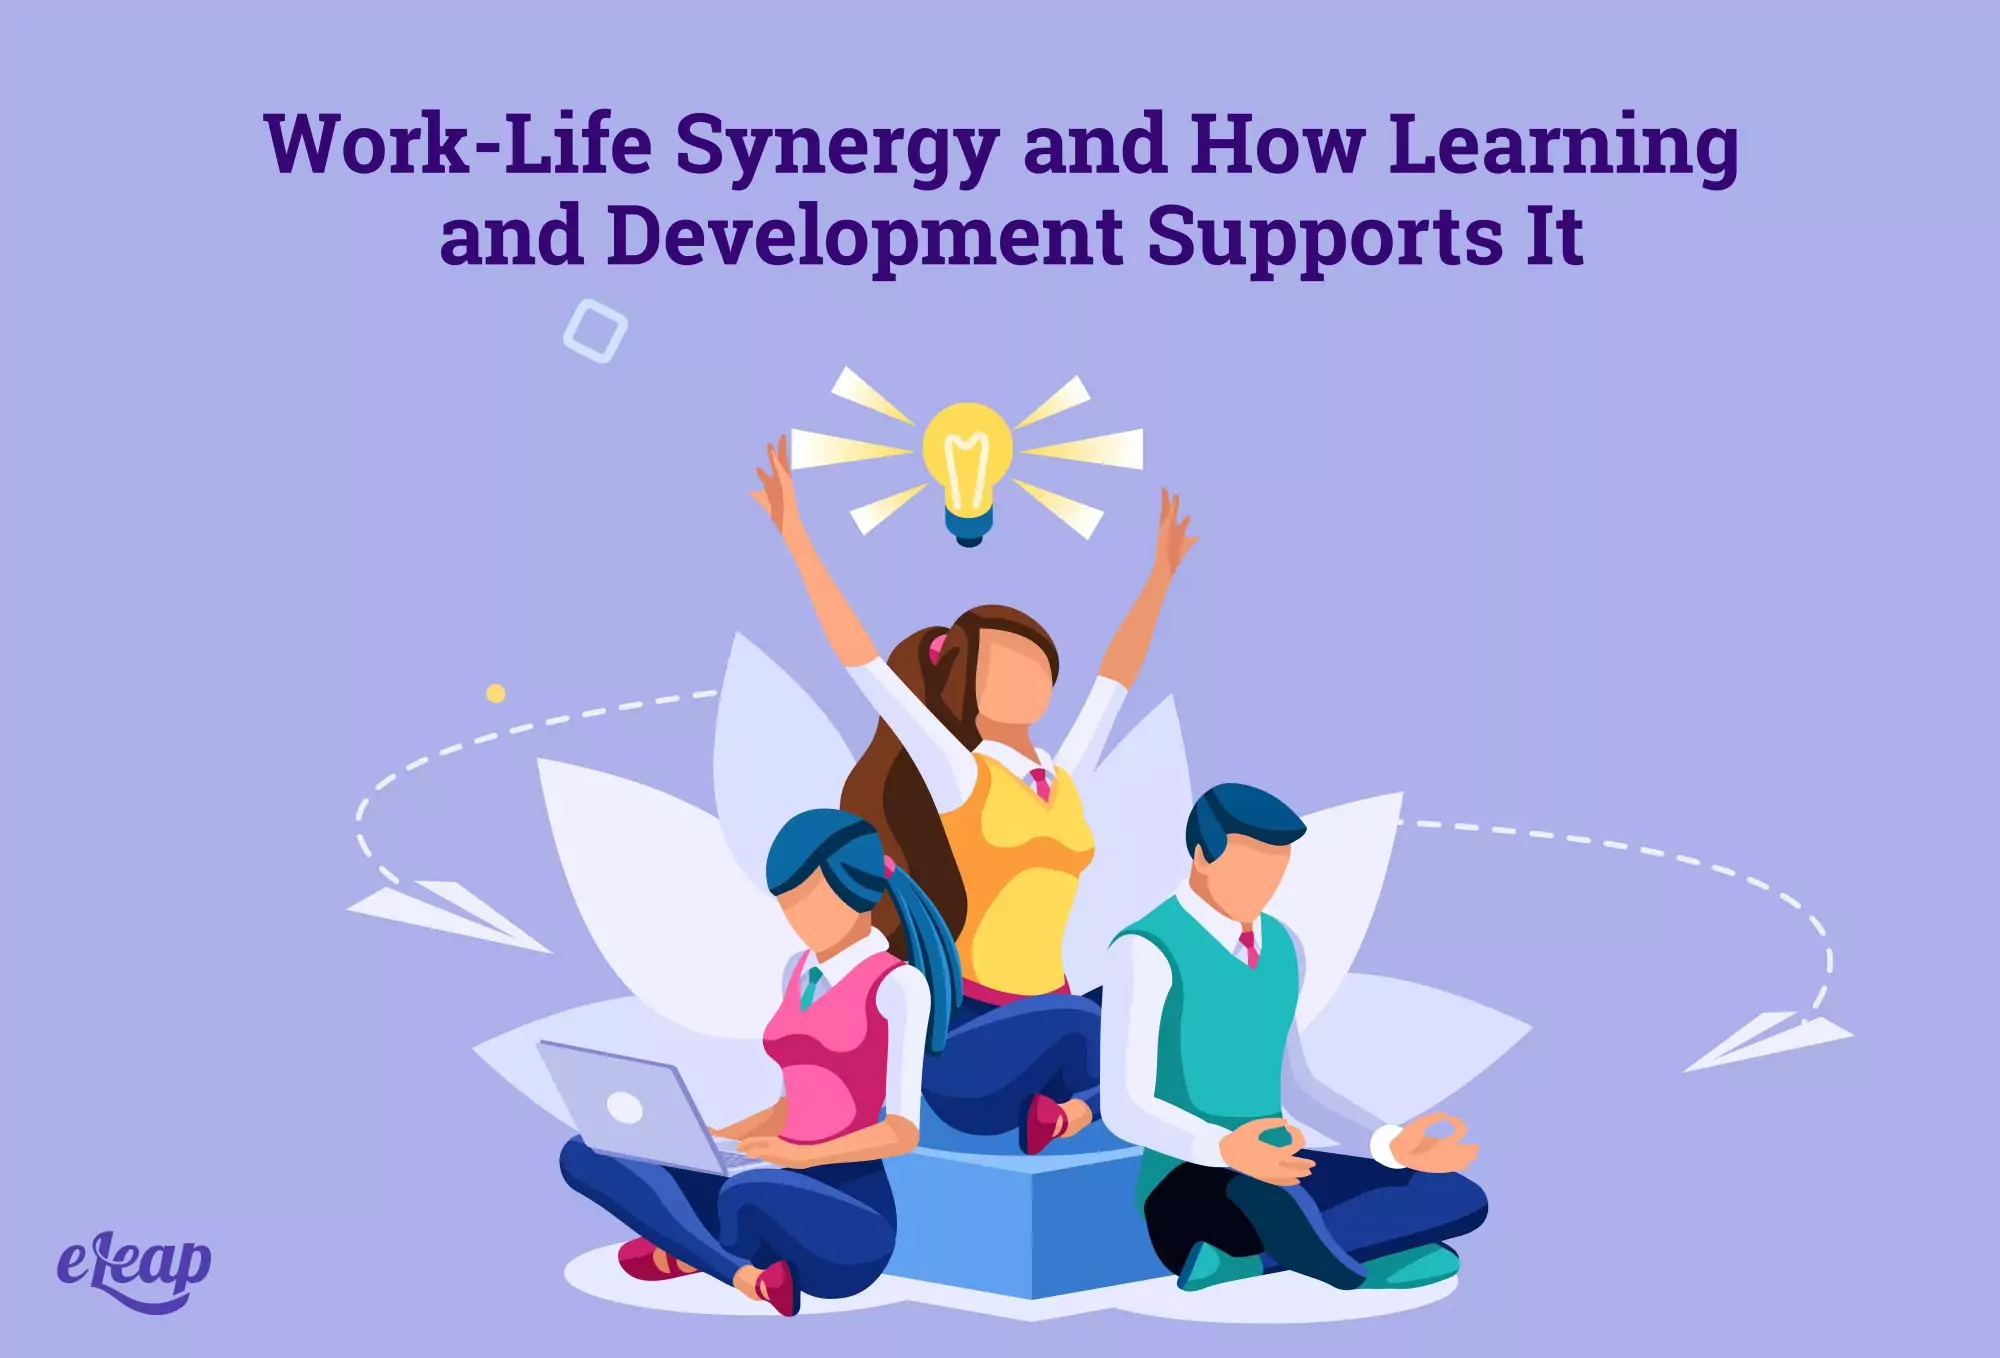 Work-Life Synergy and How Learning and Development Supports It